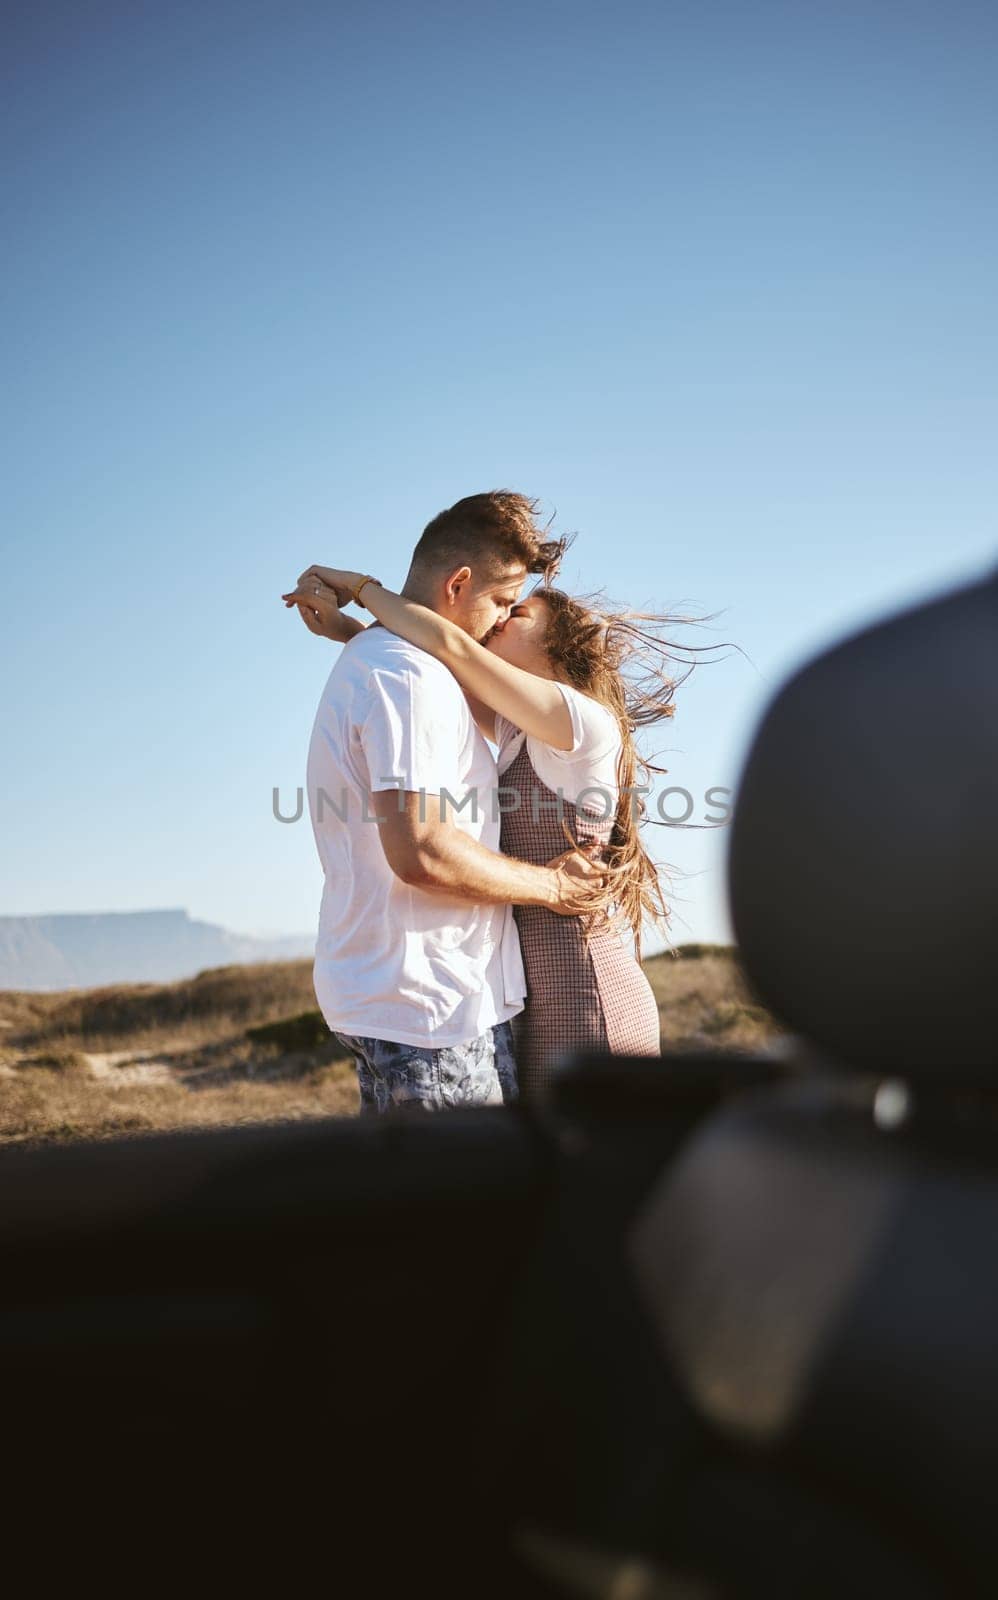 Road trip, travel and couple kiss and hug for holiday, vacation or outdoor adventure with blue sky mock up advertising or marketing. Love, romantic people with car by countryside road summer mockup by YuriArcurs